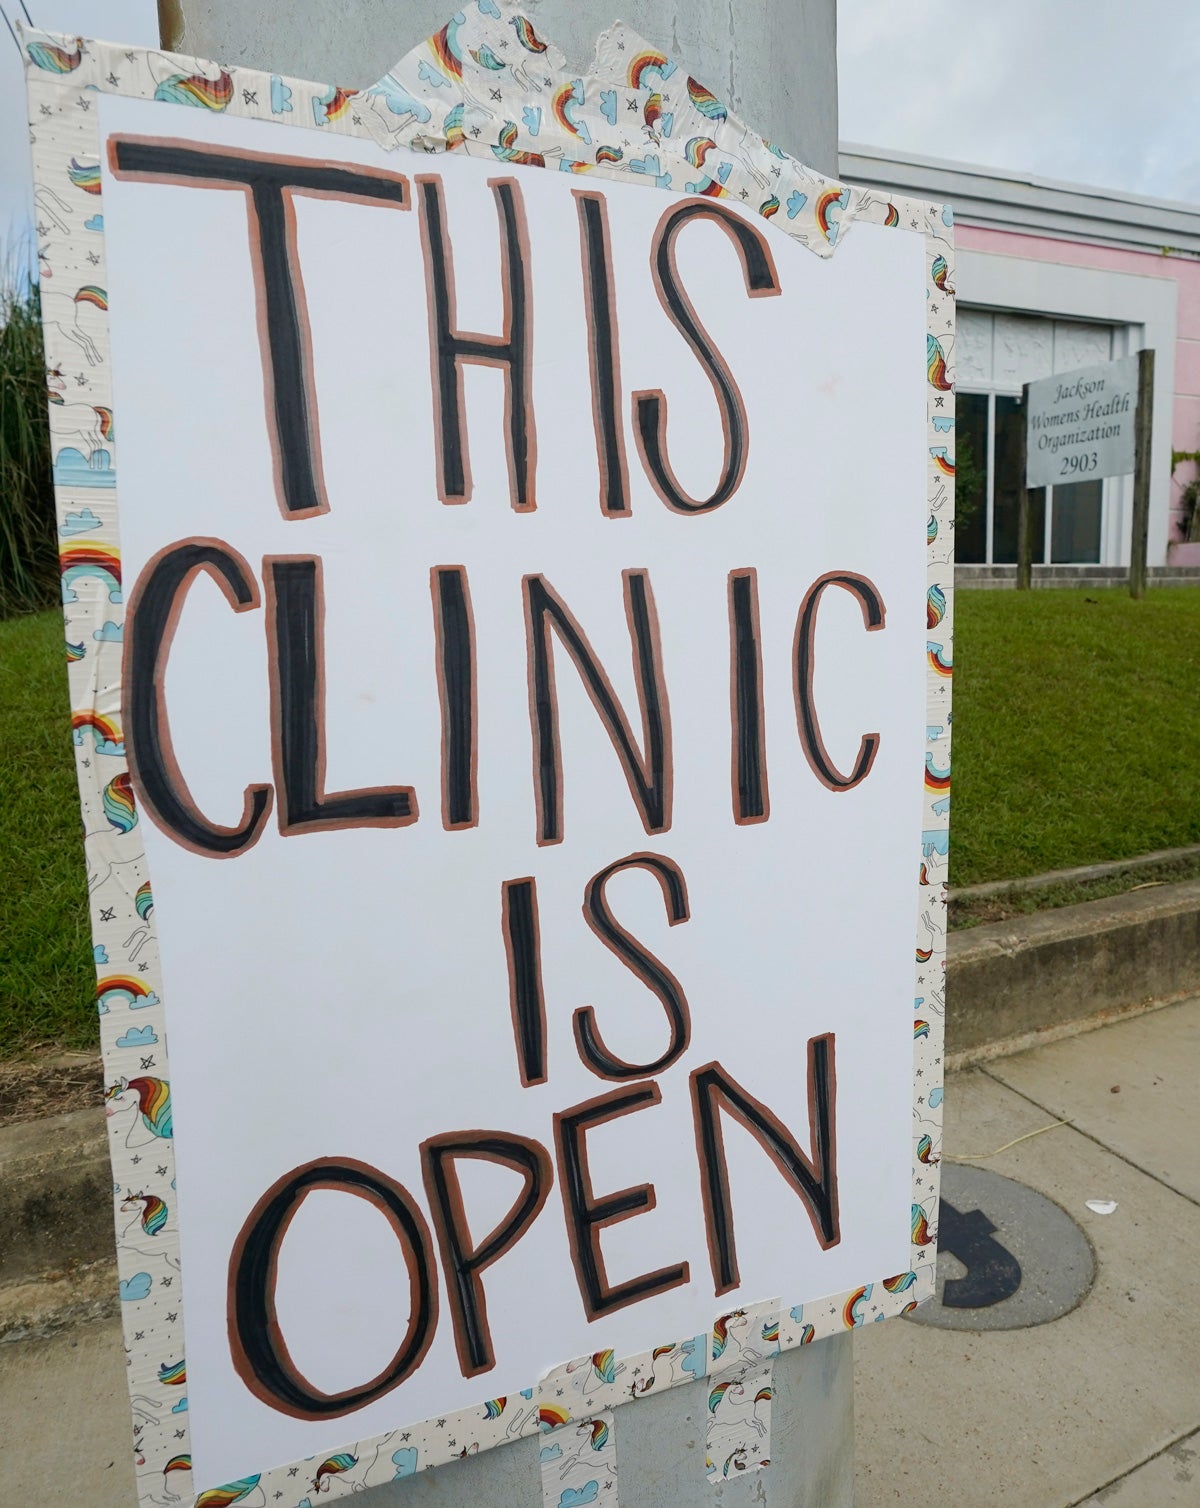 A poster board with the words “This clinic is open” in all-caps hangs from a pole in front of a green lawn and pink building, a women’s health clinic.